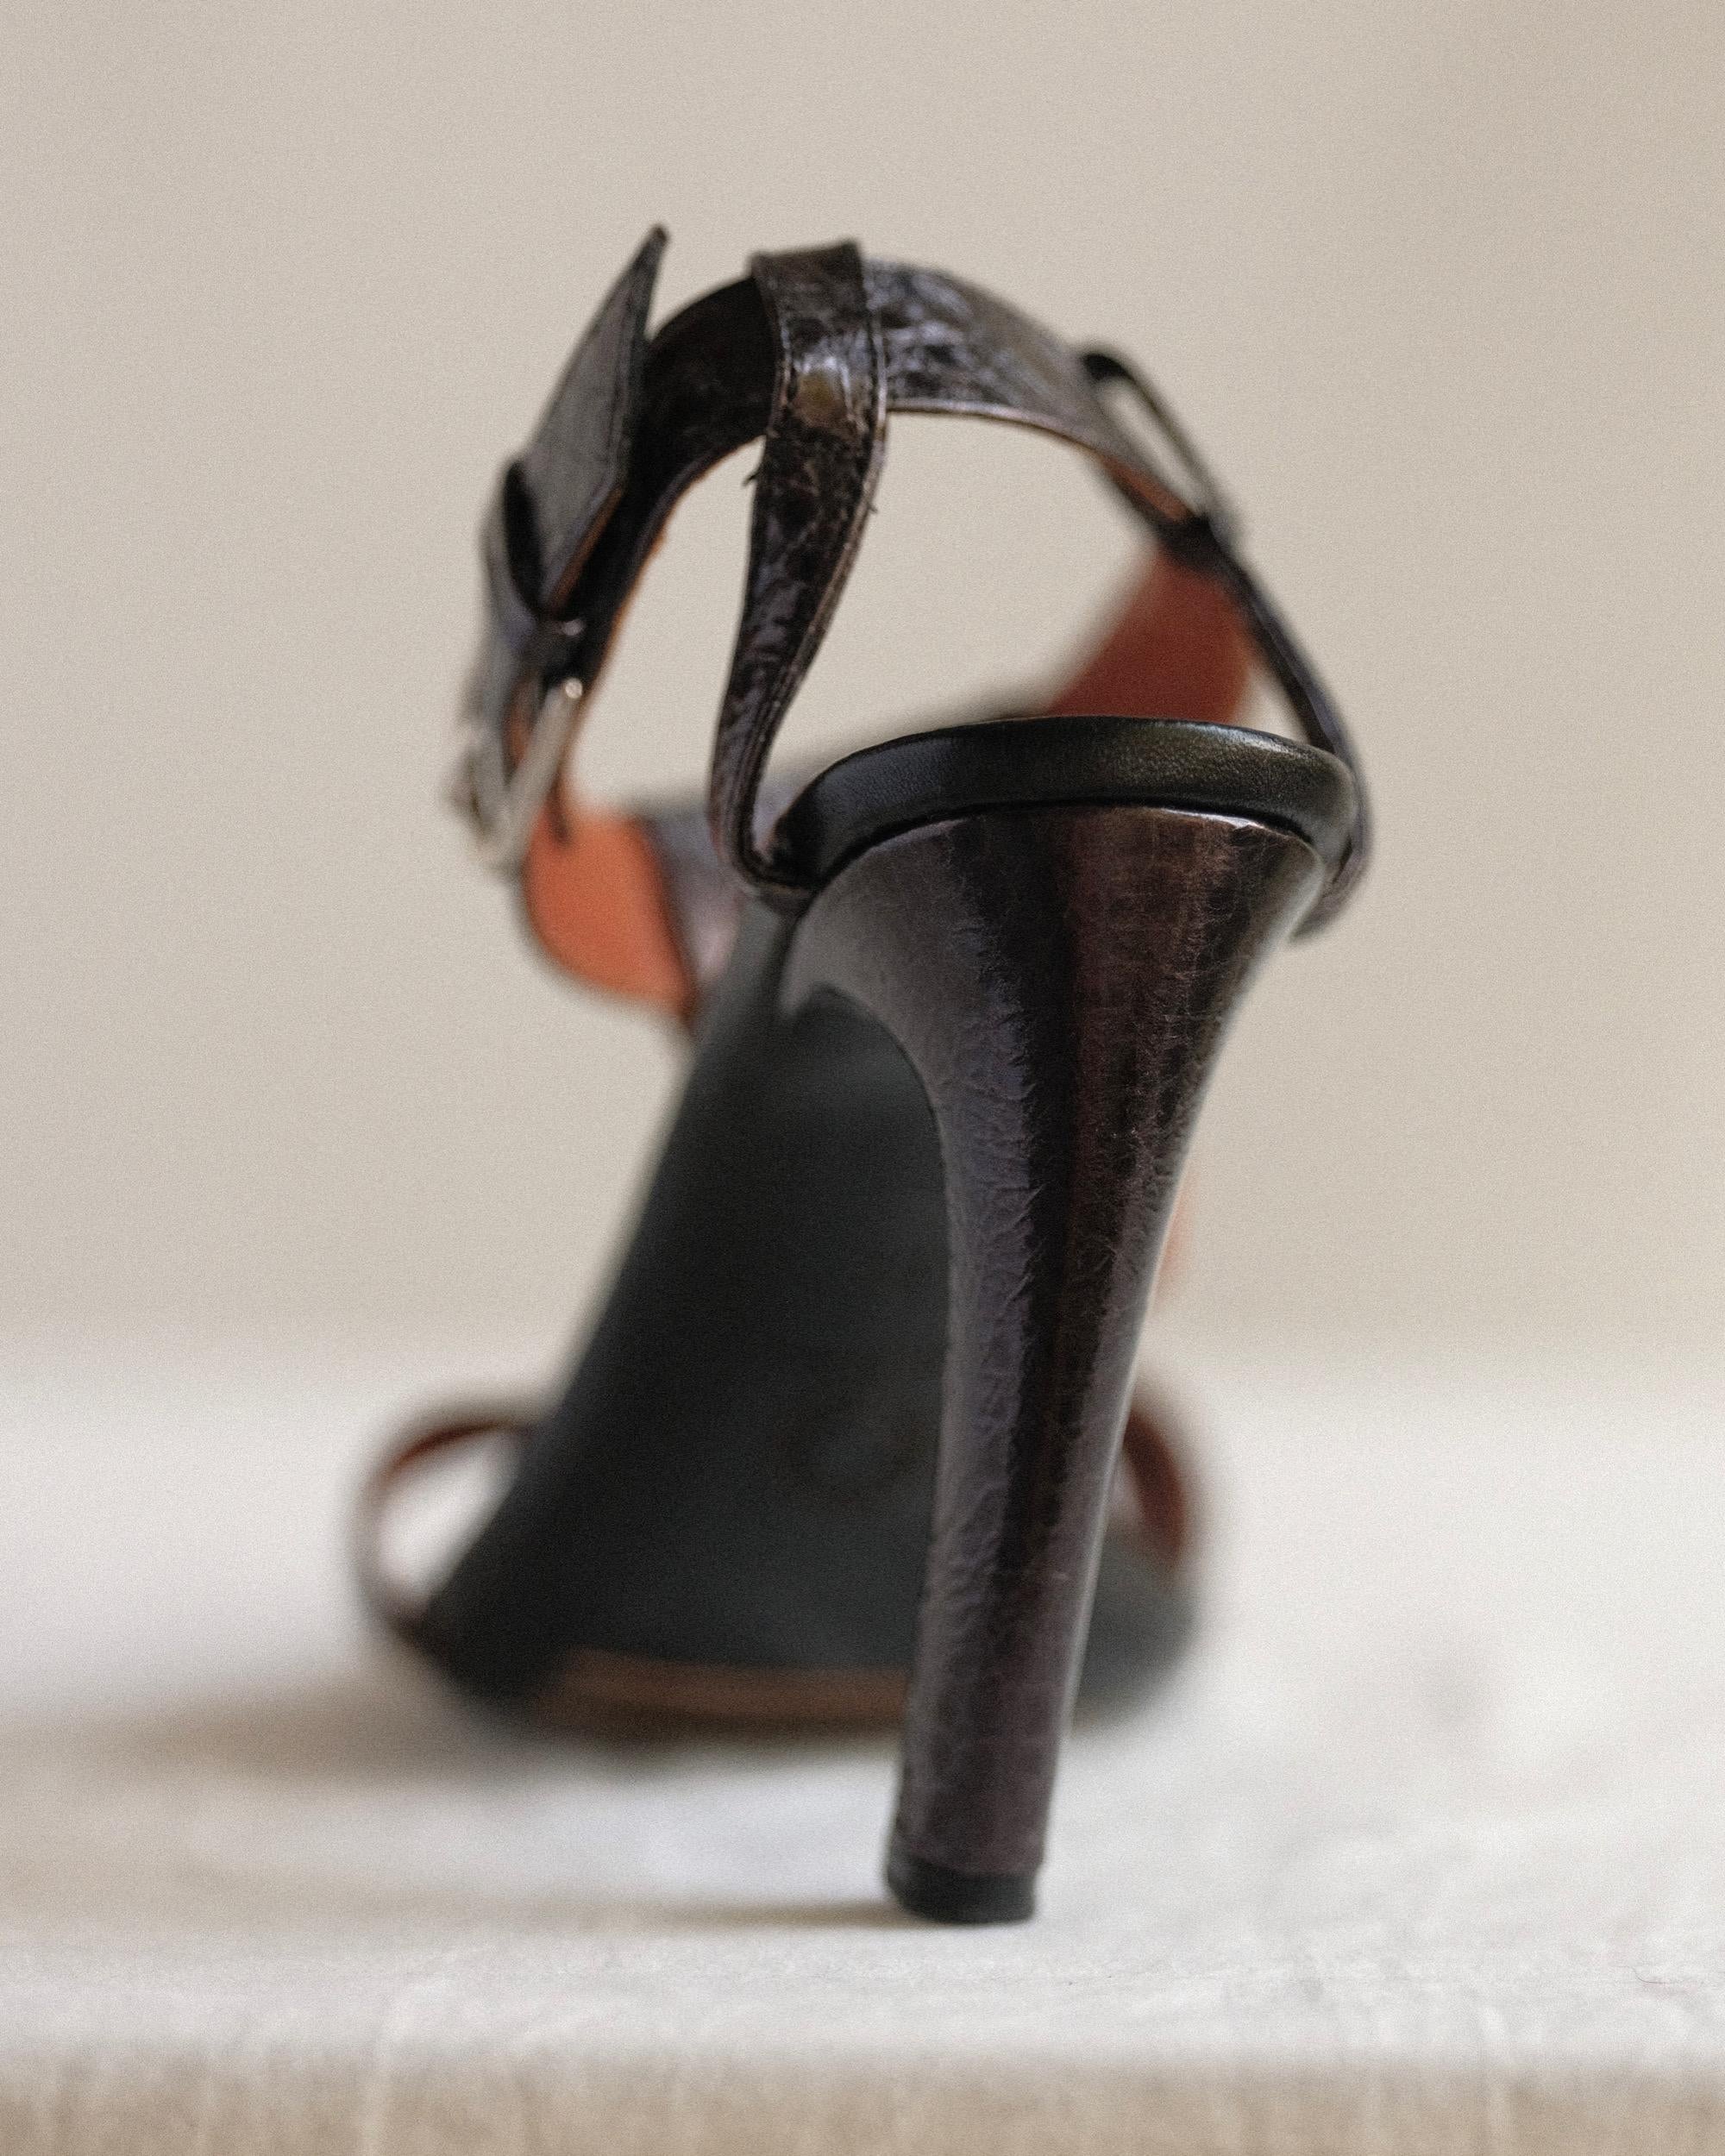 Dries Van Noten Embossed T-Strap Sandals
Black Leather
Tall Curved Heel, Wrapped in Embossed Leather
Wrap Around Straps & Buckle Closure at Ankles
Size: 37, Fits true
Heel height 4.5
Bottom shows wear, scuffs at soles, upper in great condition.